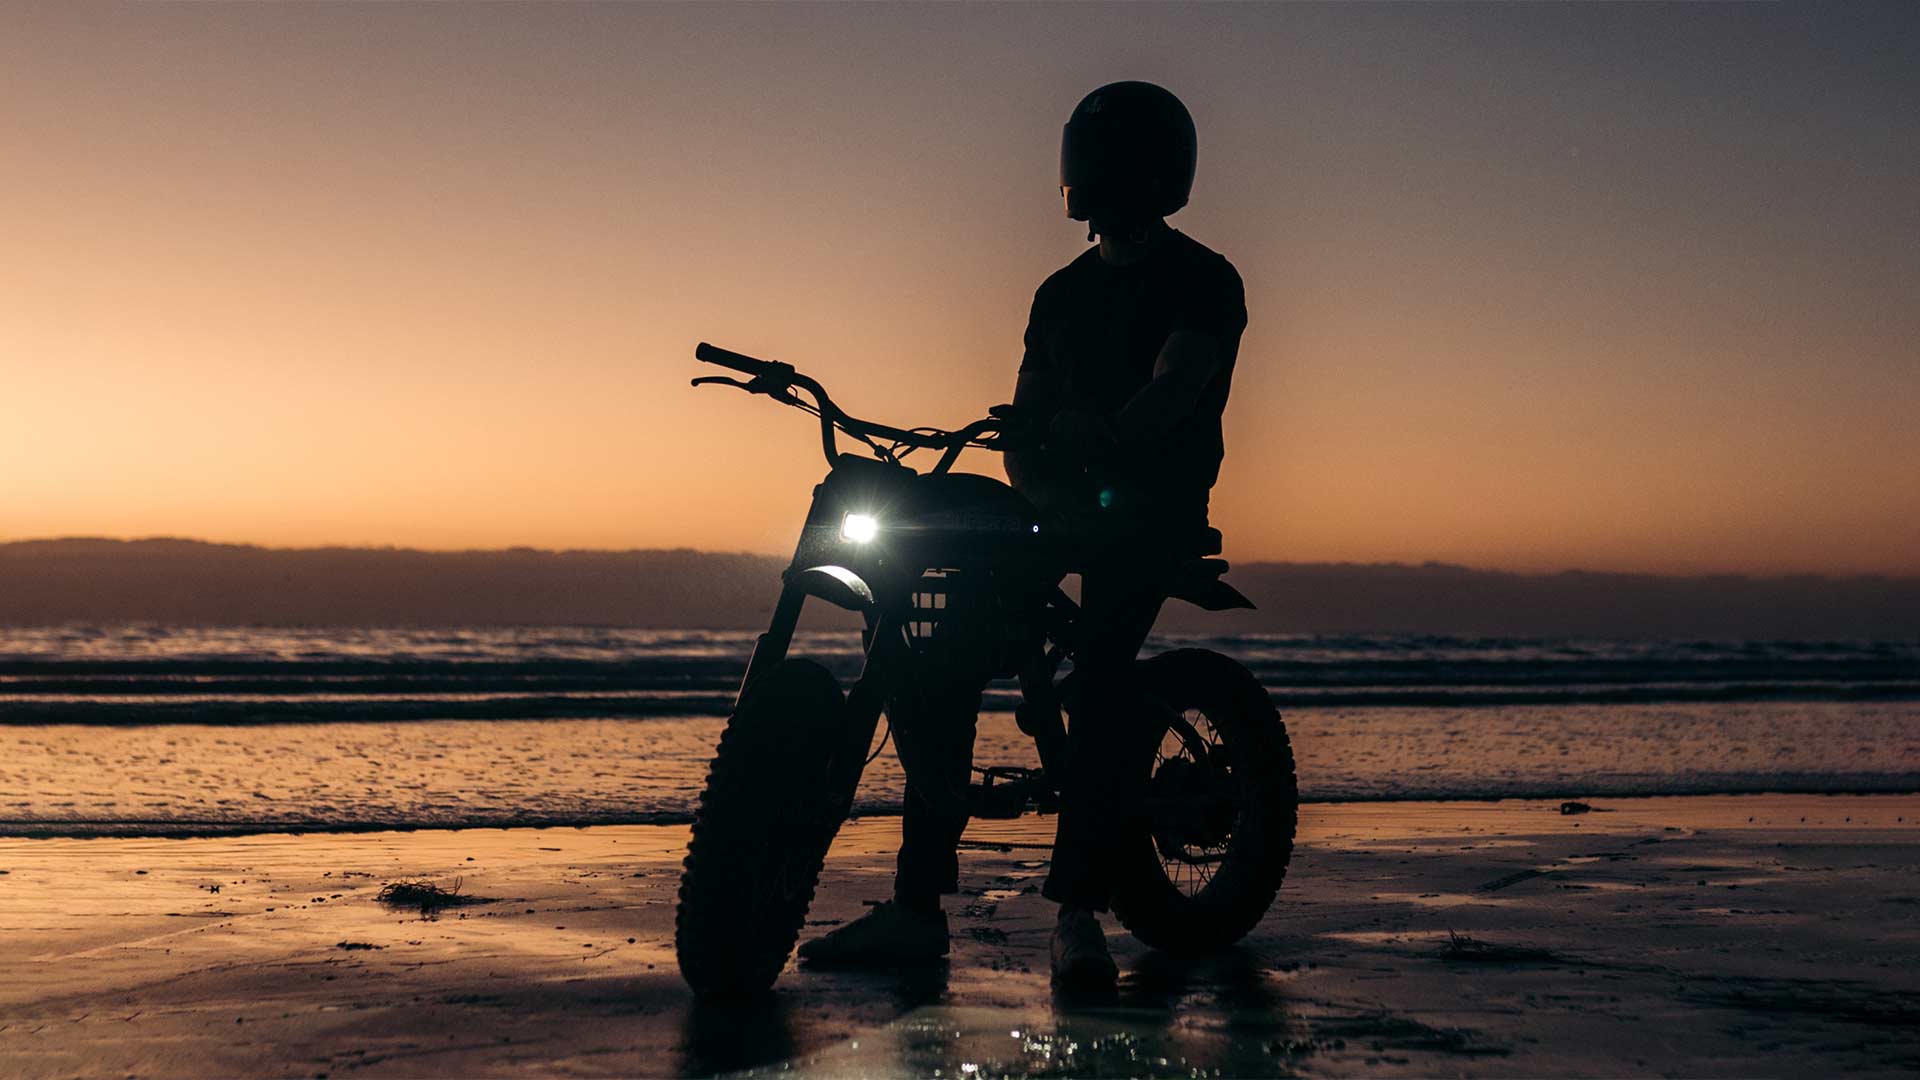 Dark silhouette of Super73 ebike on the beach at sunset.